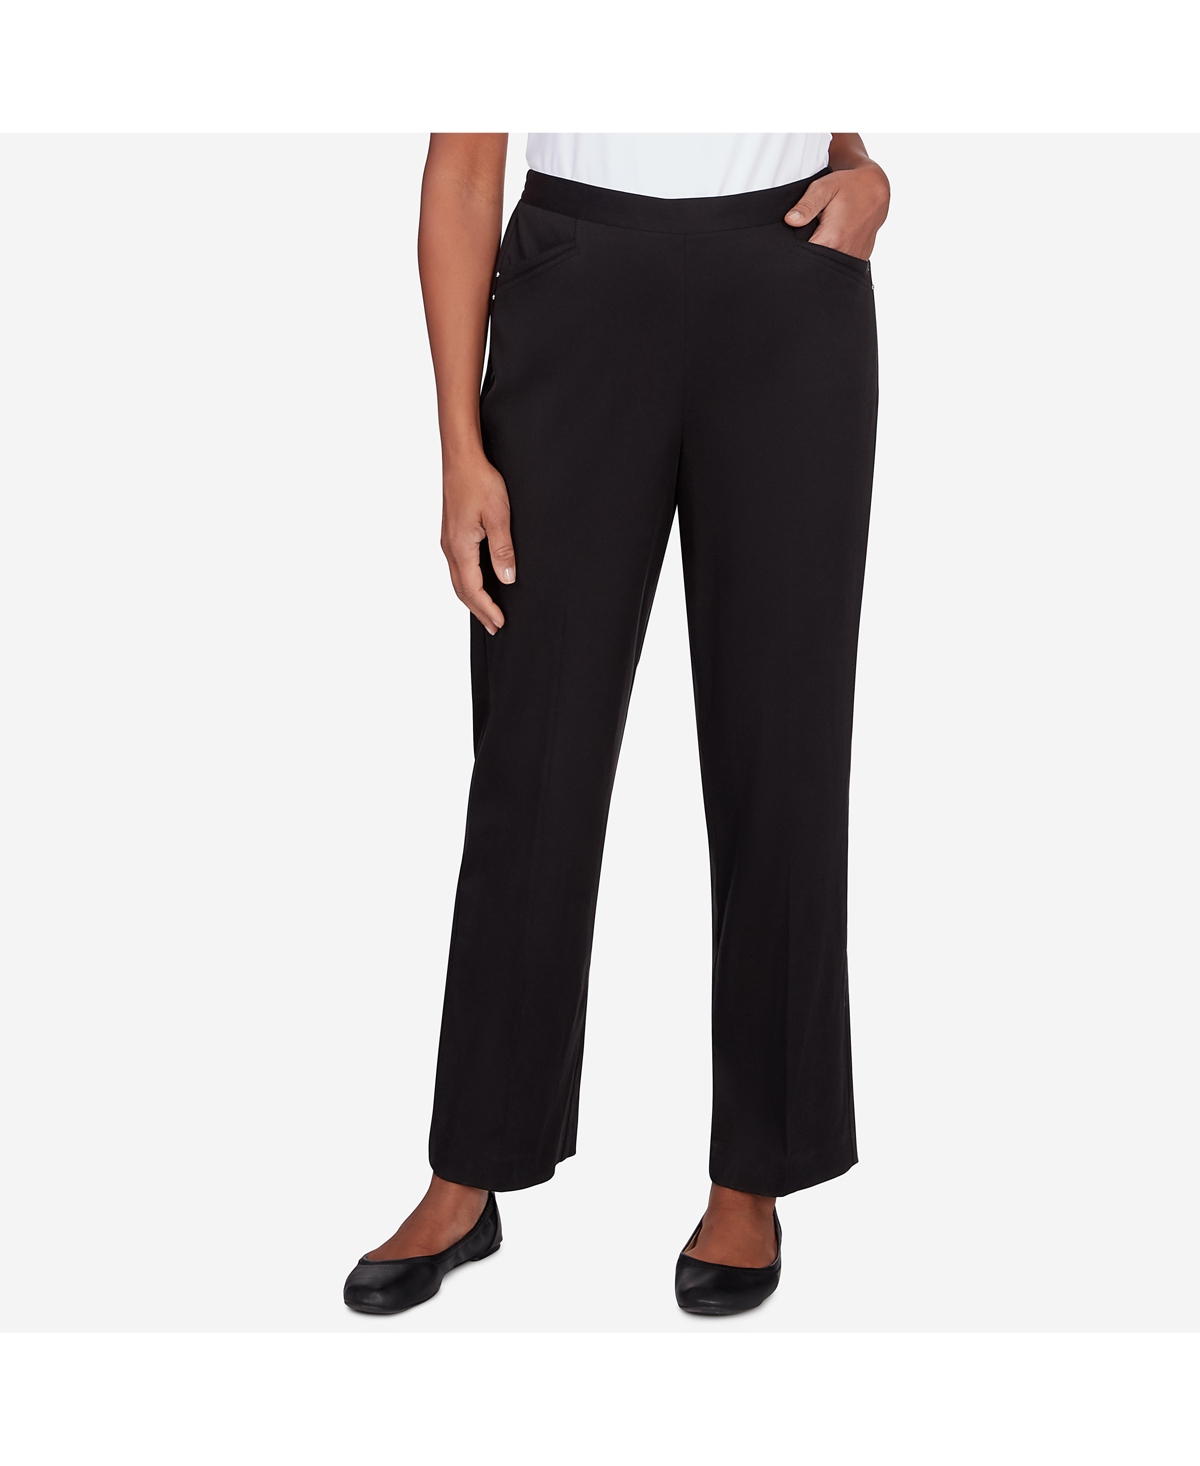 Petite Opposites Attract Pull On Sateen Pant - Black